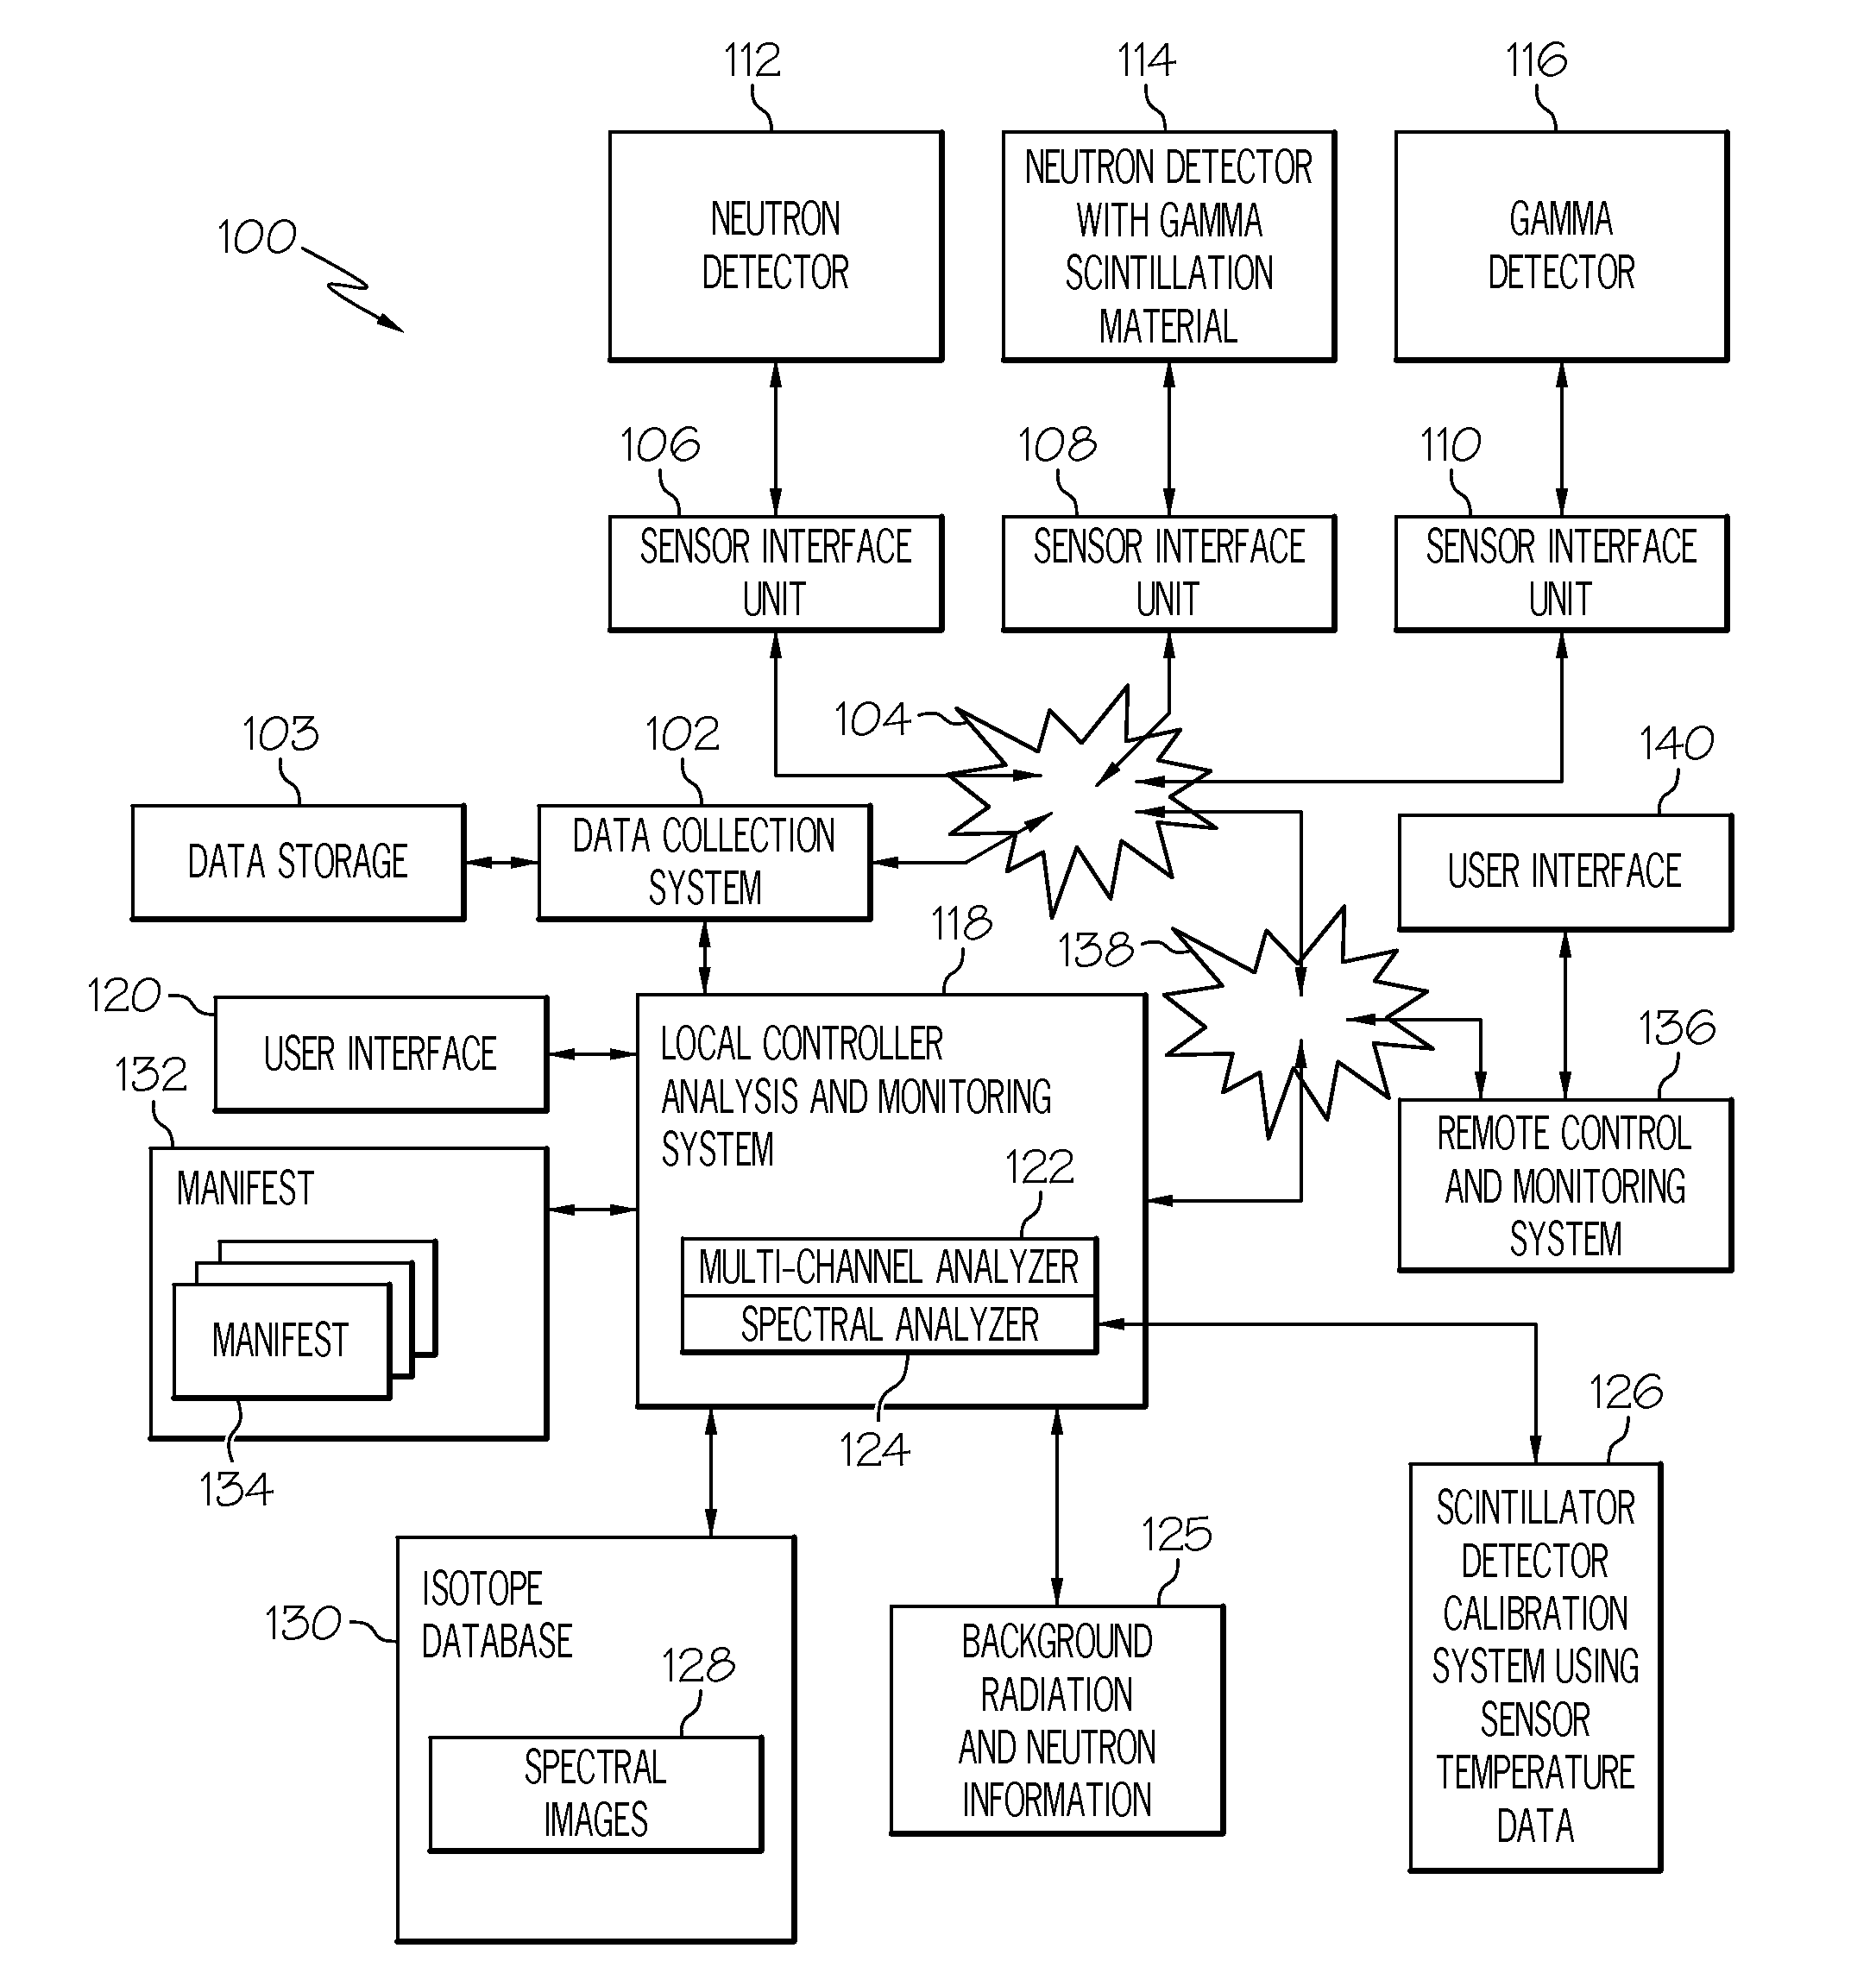 System and method for increased gamma/neutron detection